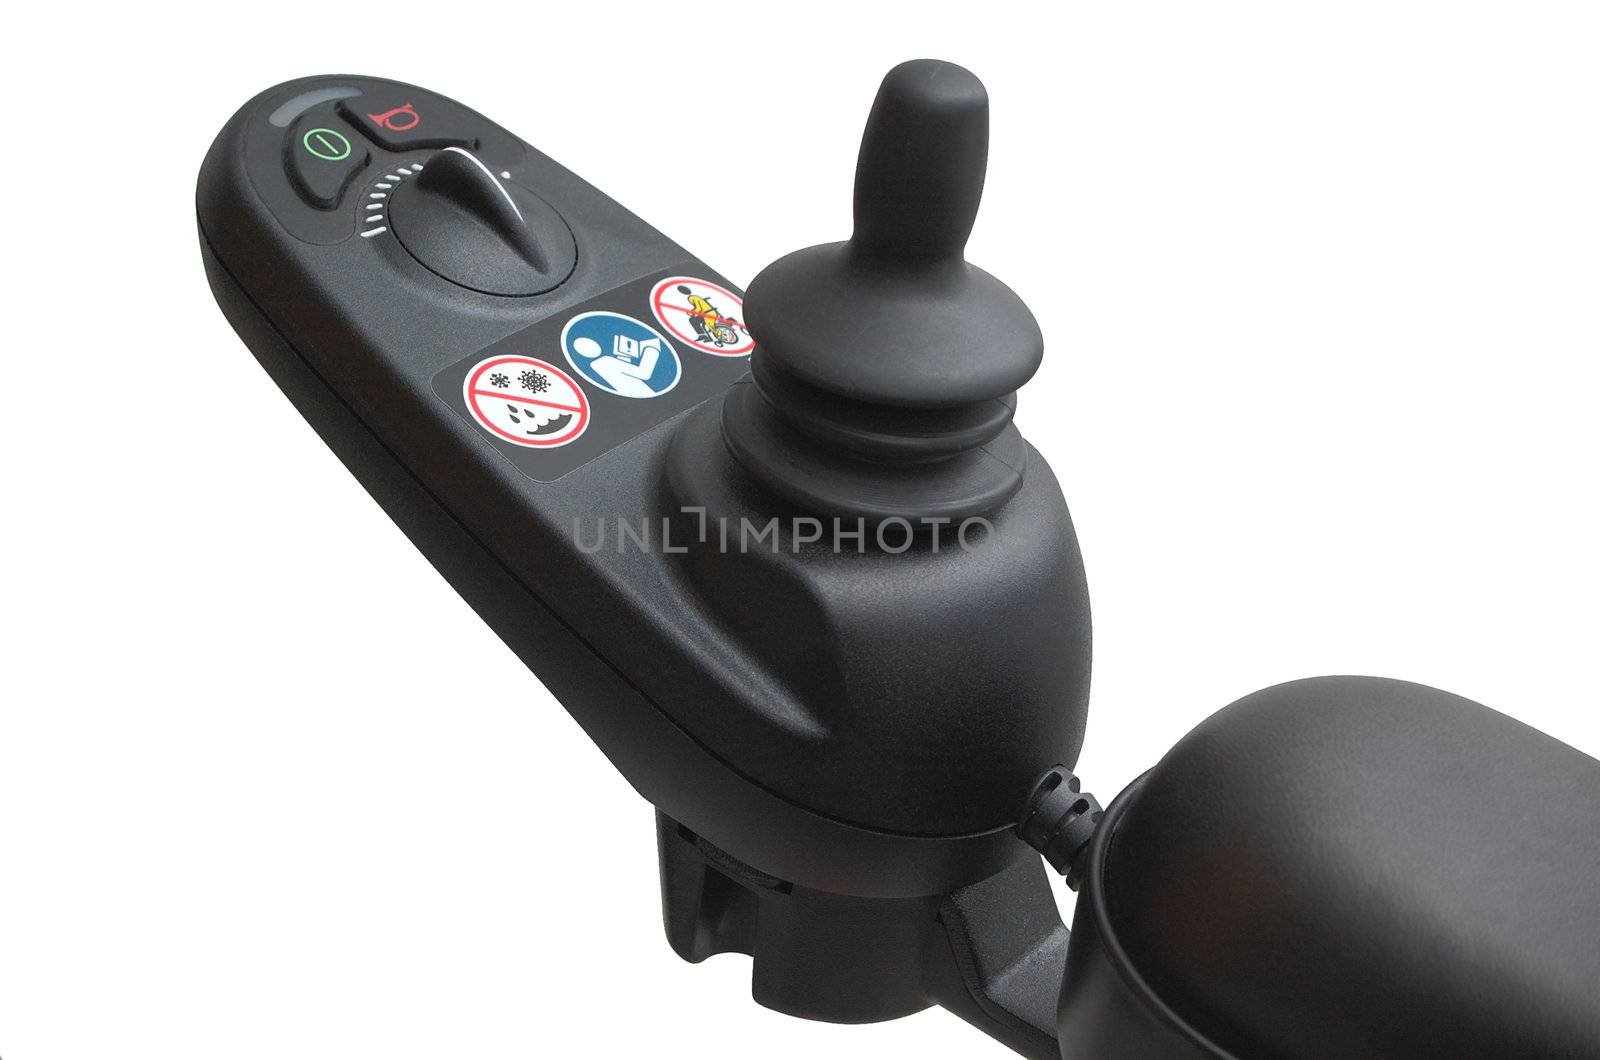 Close-up of the joystick type controller of an electrically powered wheelchair, with speed control knob and buttons for power and a warning horn.